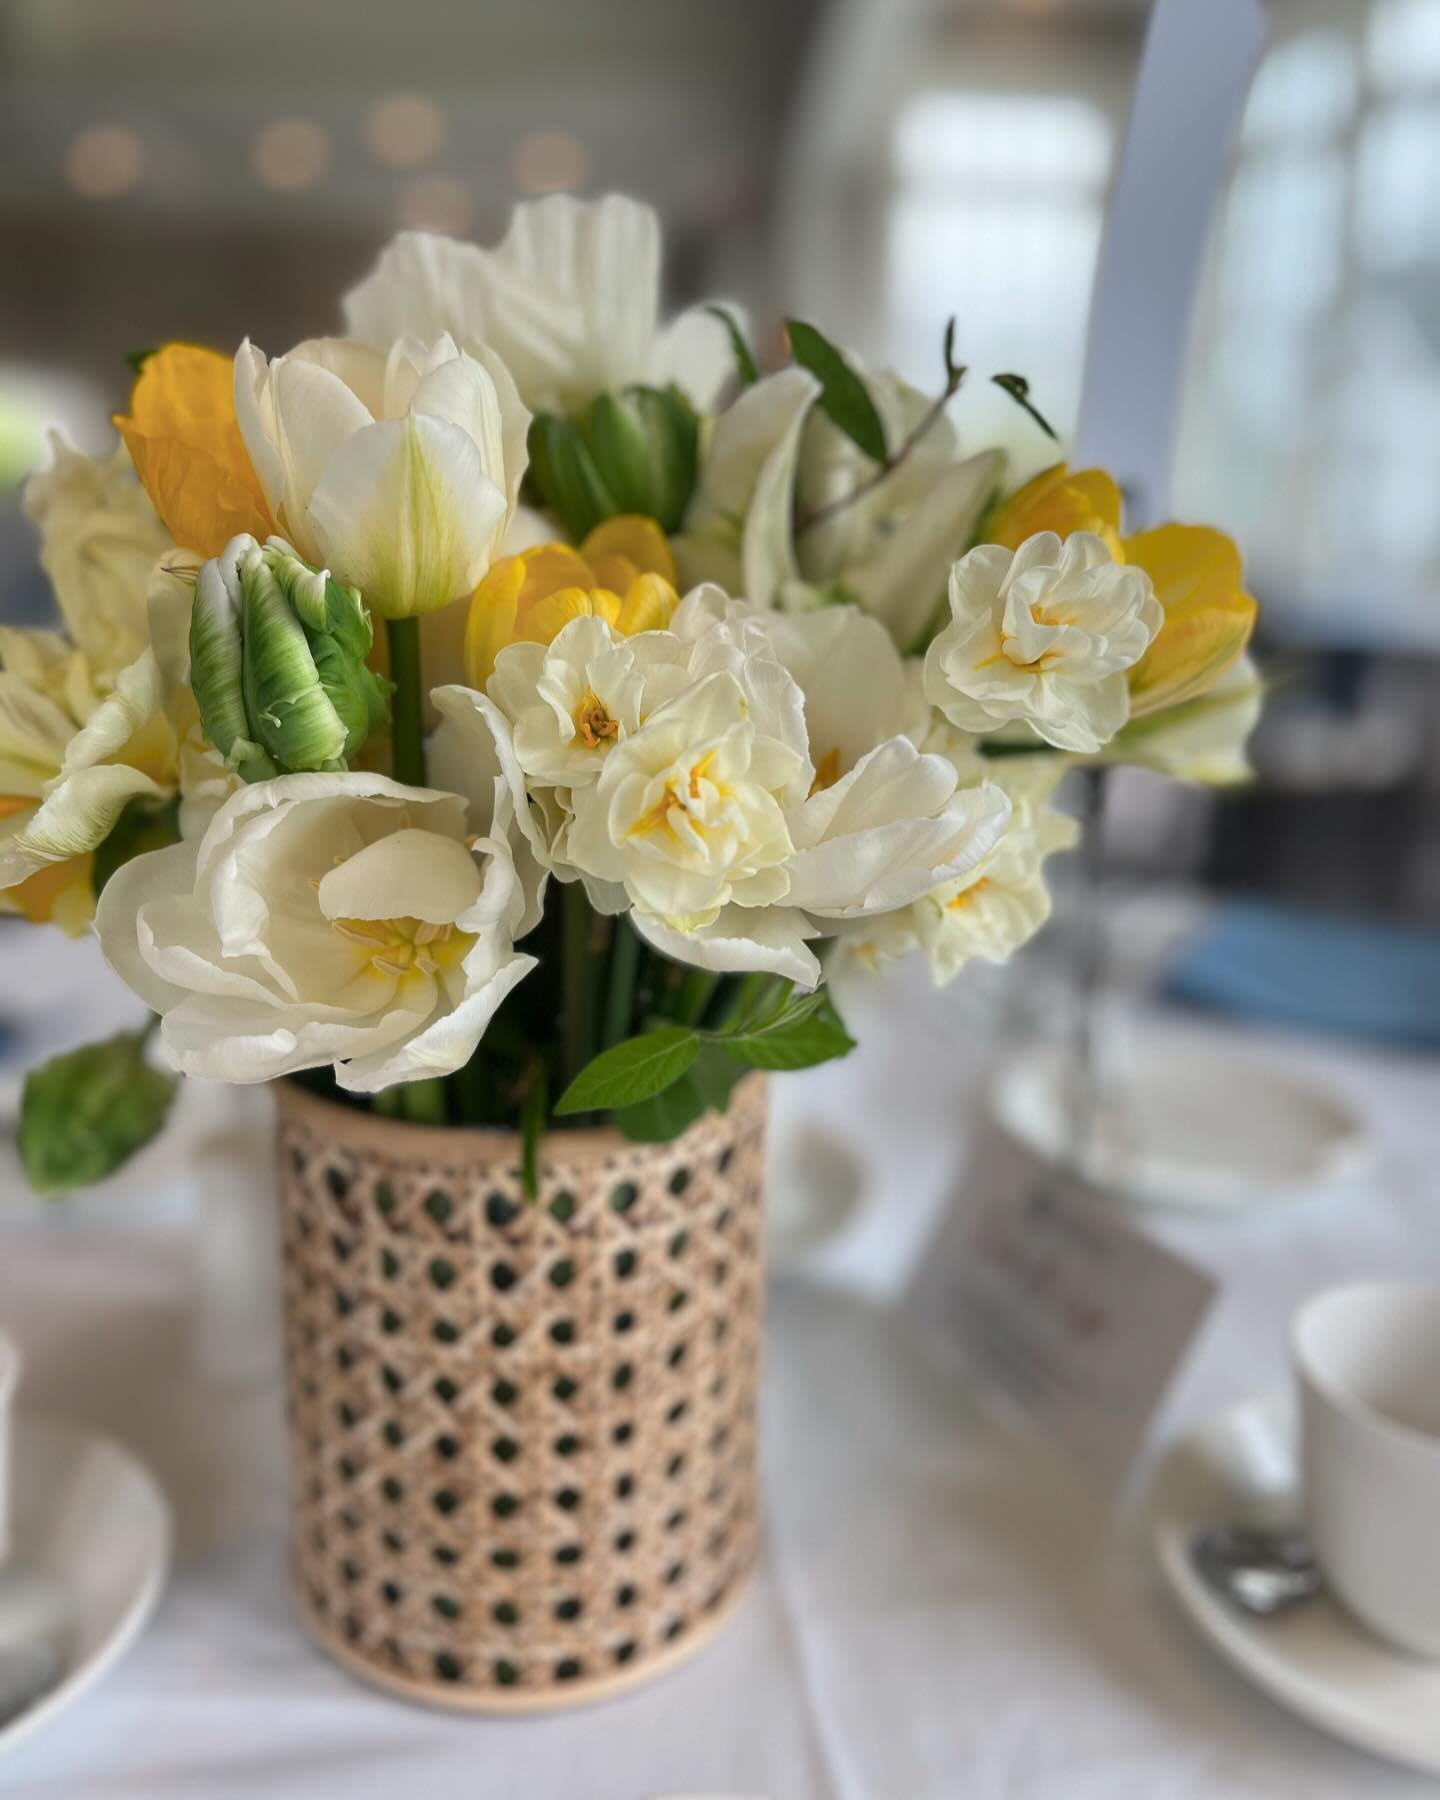 Bright, happy things. A whole Dottie load of them! Beautiful, locally grown luncheon blooms for a locally focussed organization that does so much in our town and surrounding community. Special thanks to @bloomcourtfarm and @connecticutflowercollectiv